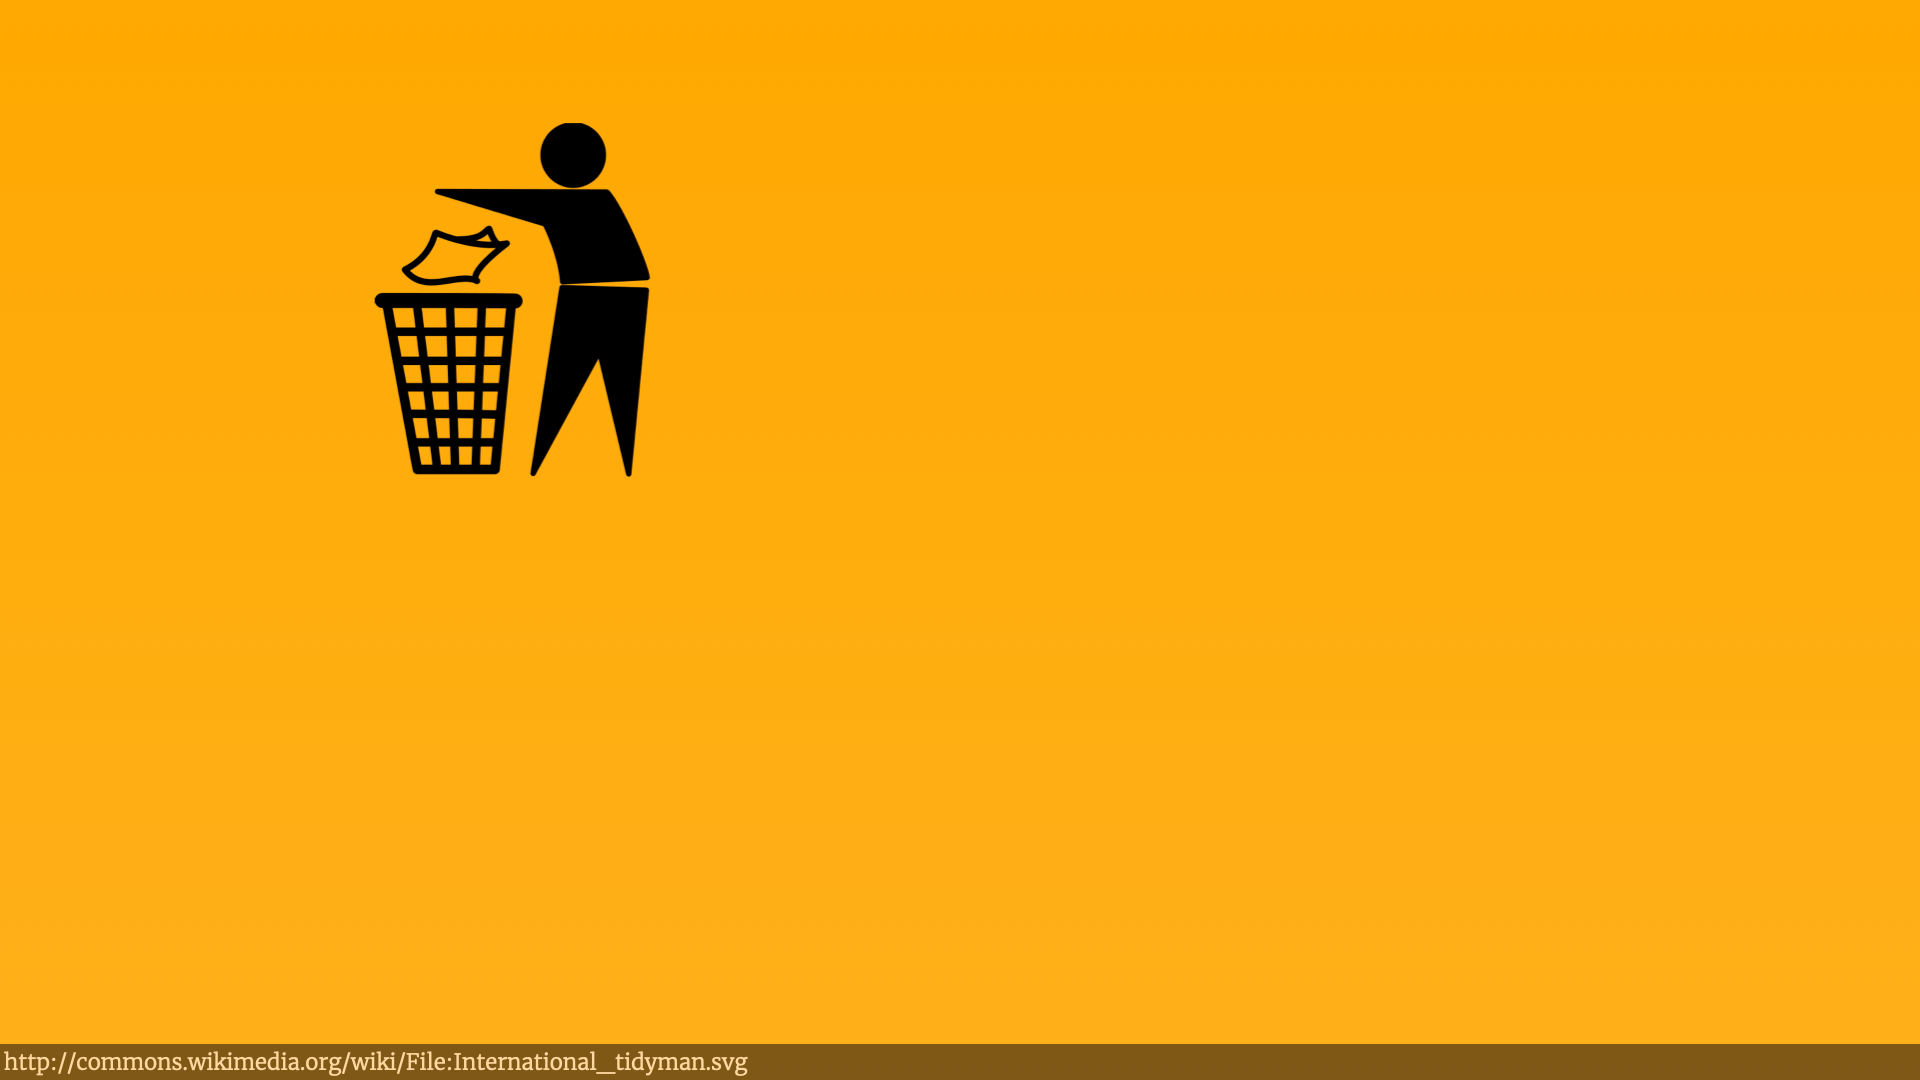 In the top-left an illustration of somebody throwing something into a bin.